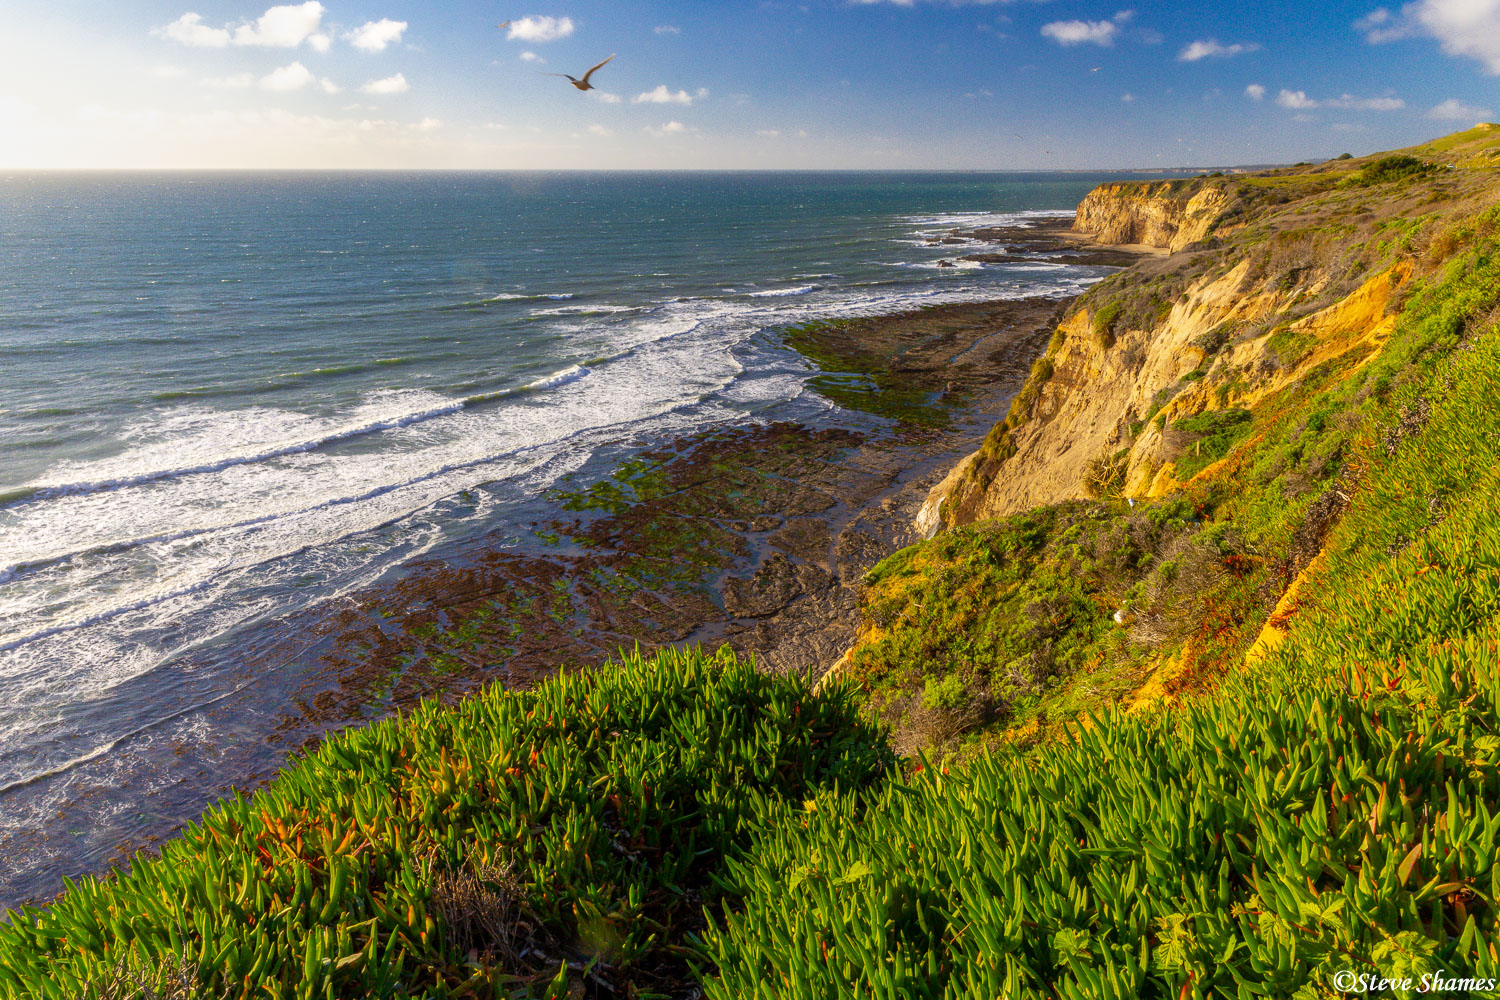 A seagull flying over the Pacific coast bluffs.